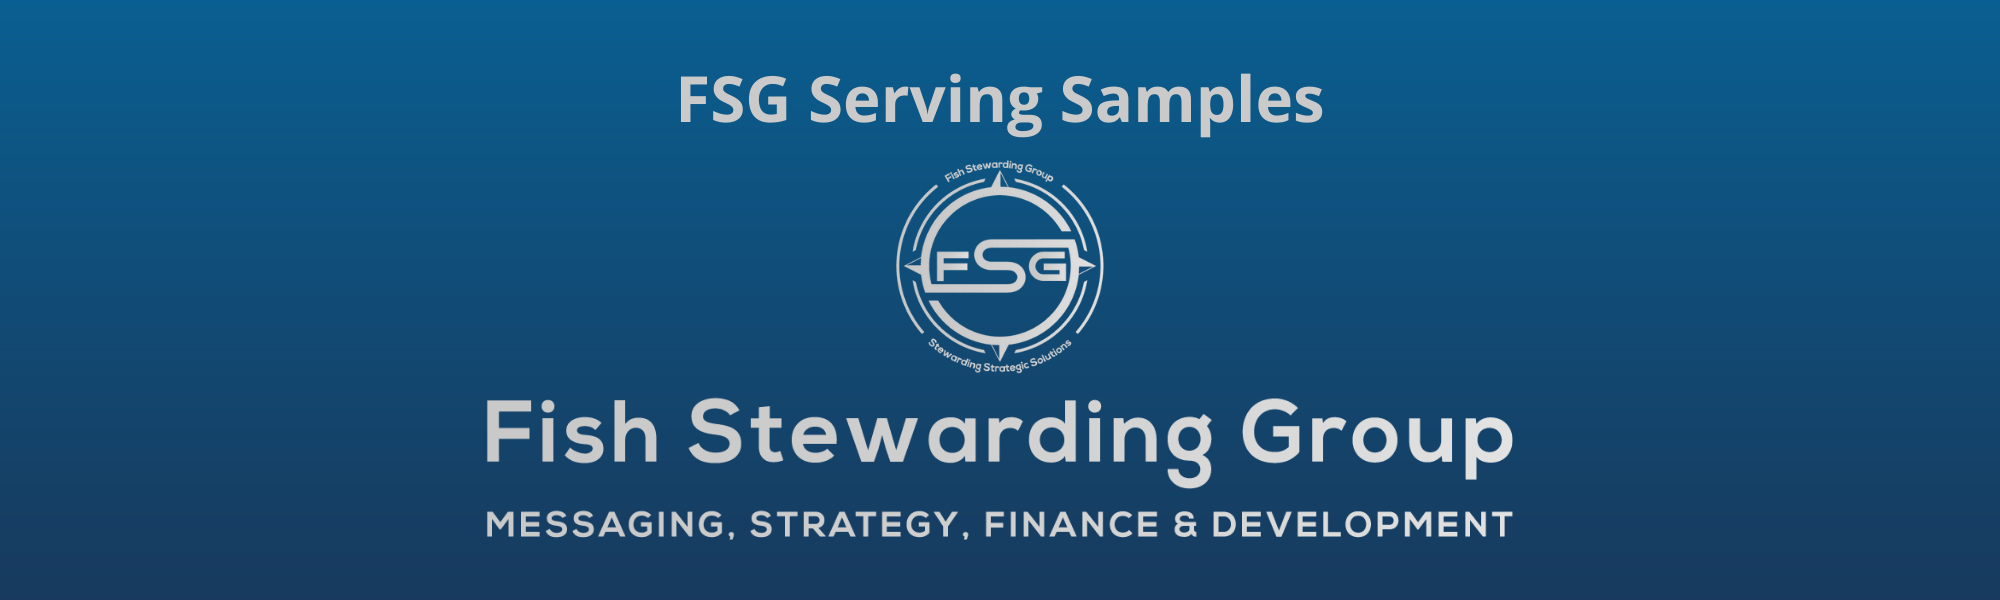 A thin rectangular Footer graphic for the FSG Serving Samples page. The background is a blue gradient color that goes from a dark blue on the bottom to a lighter blue on top. The text in gray on top reads FSG Serving Samples. The text in gray on the bottom center reads: Fish Stewarding Group and beneath that, the text reads Messaging, Strategy, Finance and Development. In the center above the text is the FSG logo in gray. The logo has the letters FSG in the middle with a circle with four pointed arrows facing north, south, east and west with the S connected to that circle. Four rounded lines make the next circle of the circle and the last layer is a thin circle with the text on the Bottom that reads Stewarding Strategist Solutions and on top, the text reads Fish Stewarding Group.